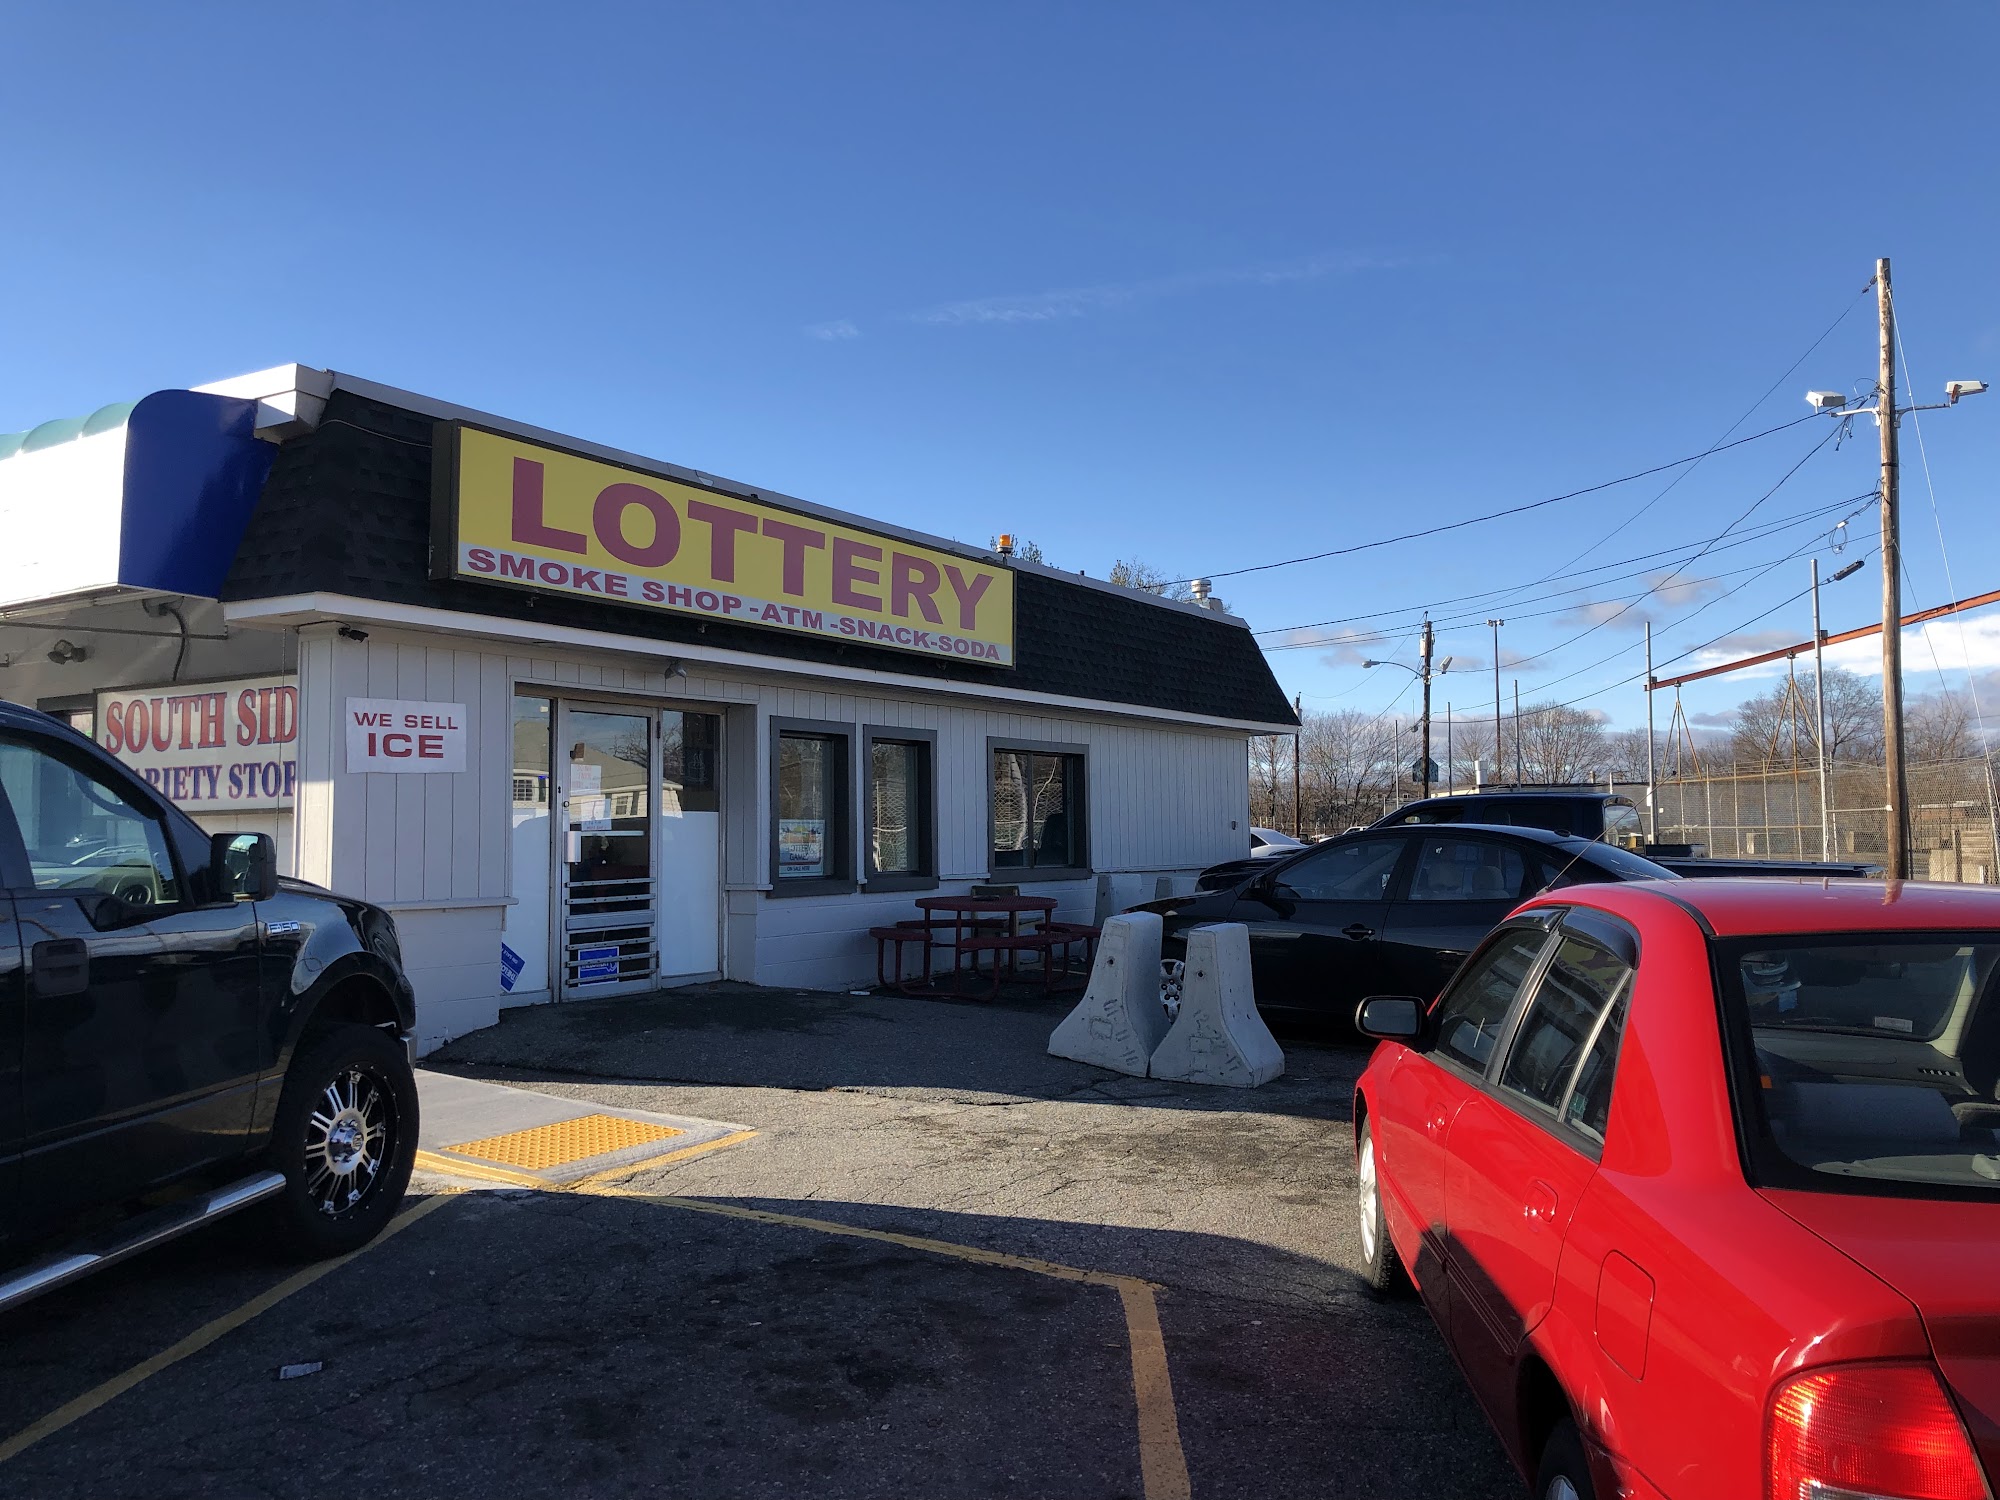 South Side Beer & Variety (Beer, Convenience and Lottery Store)